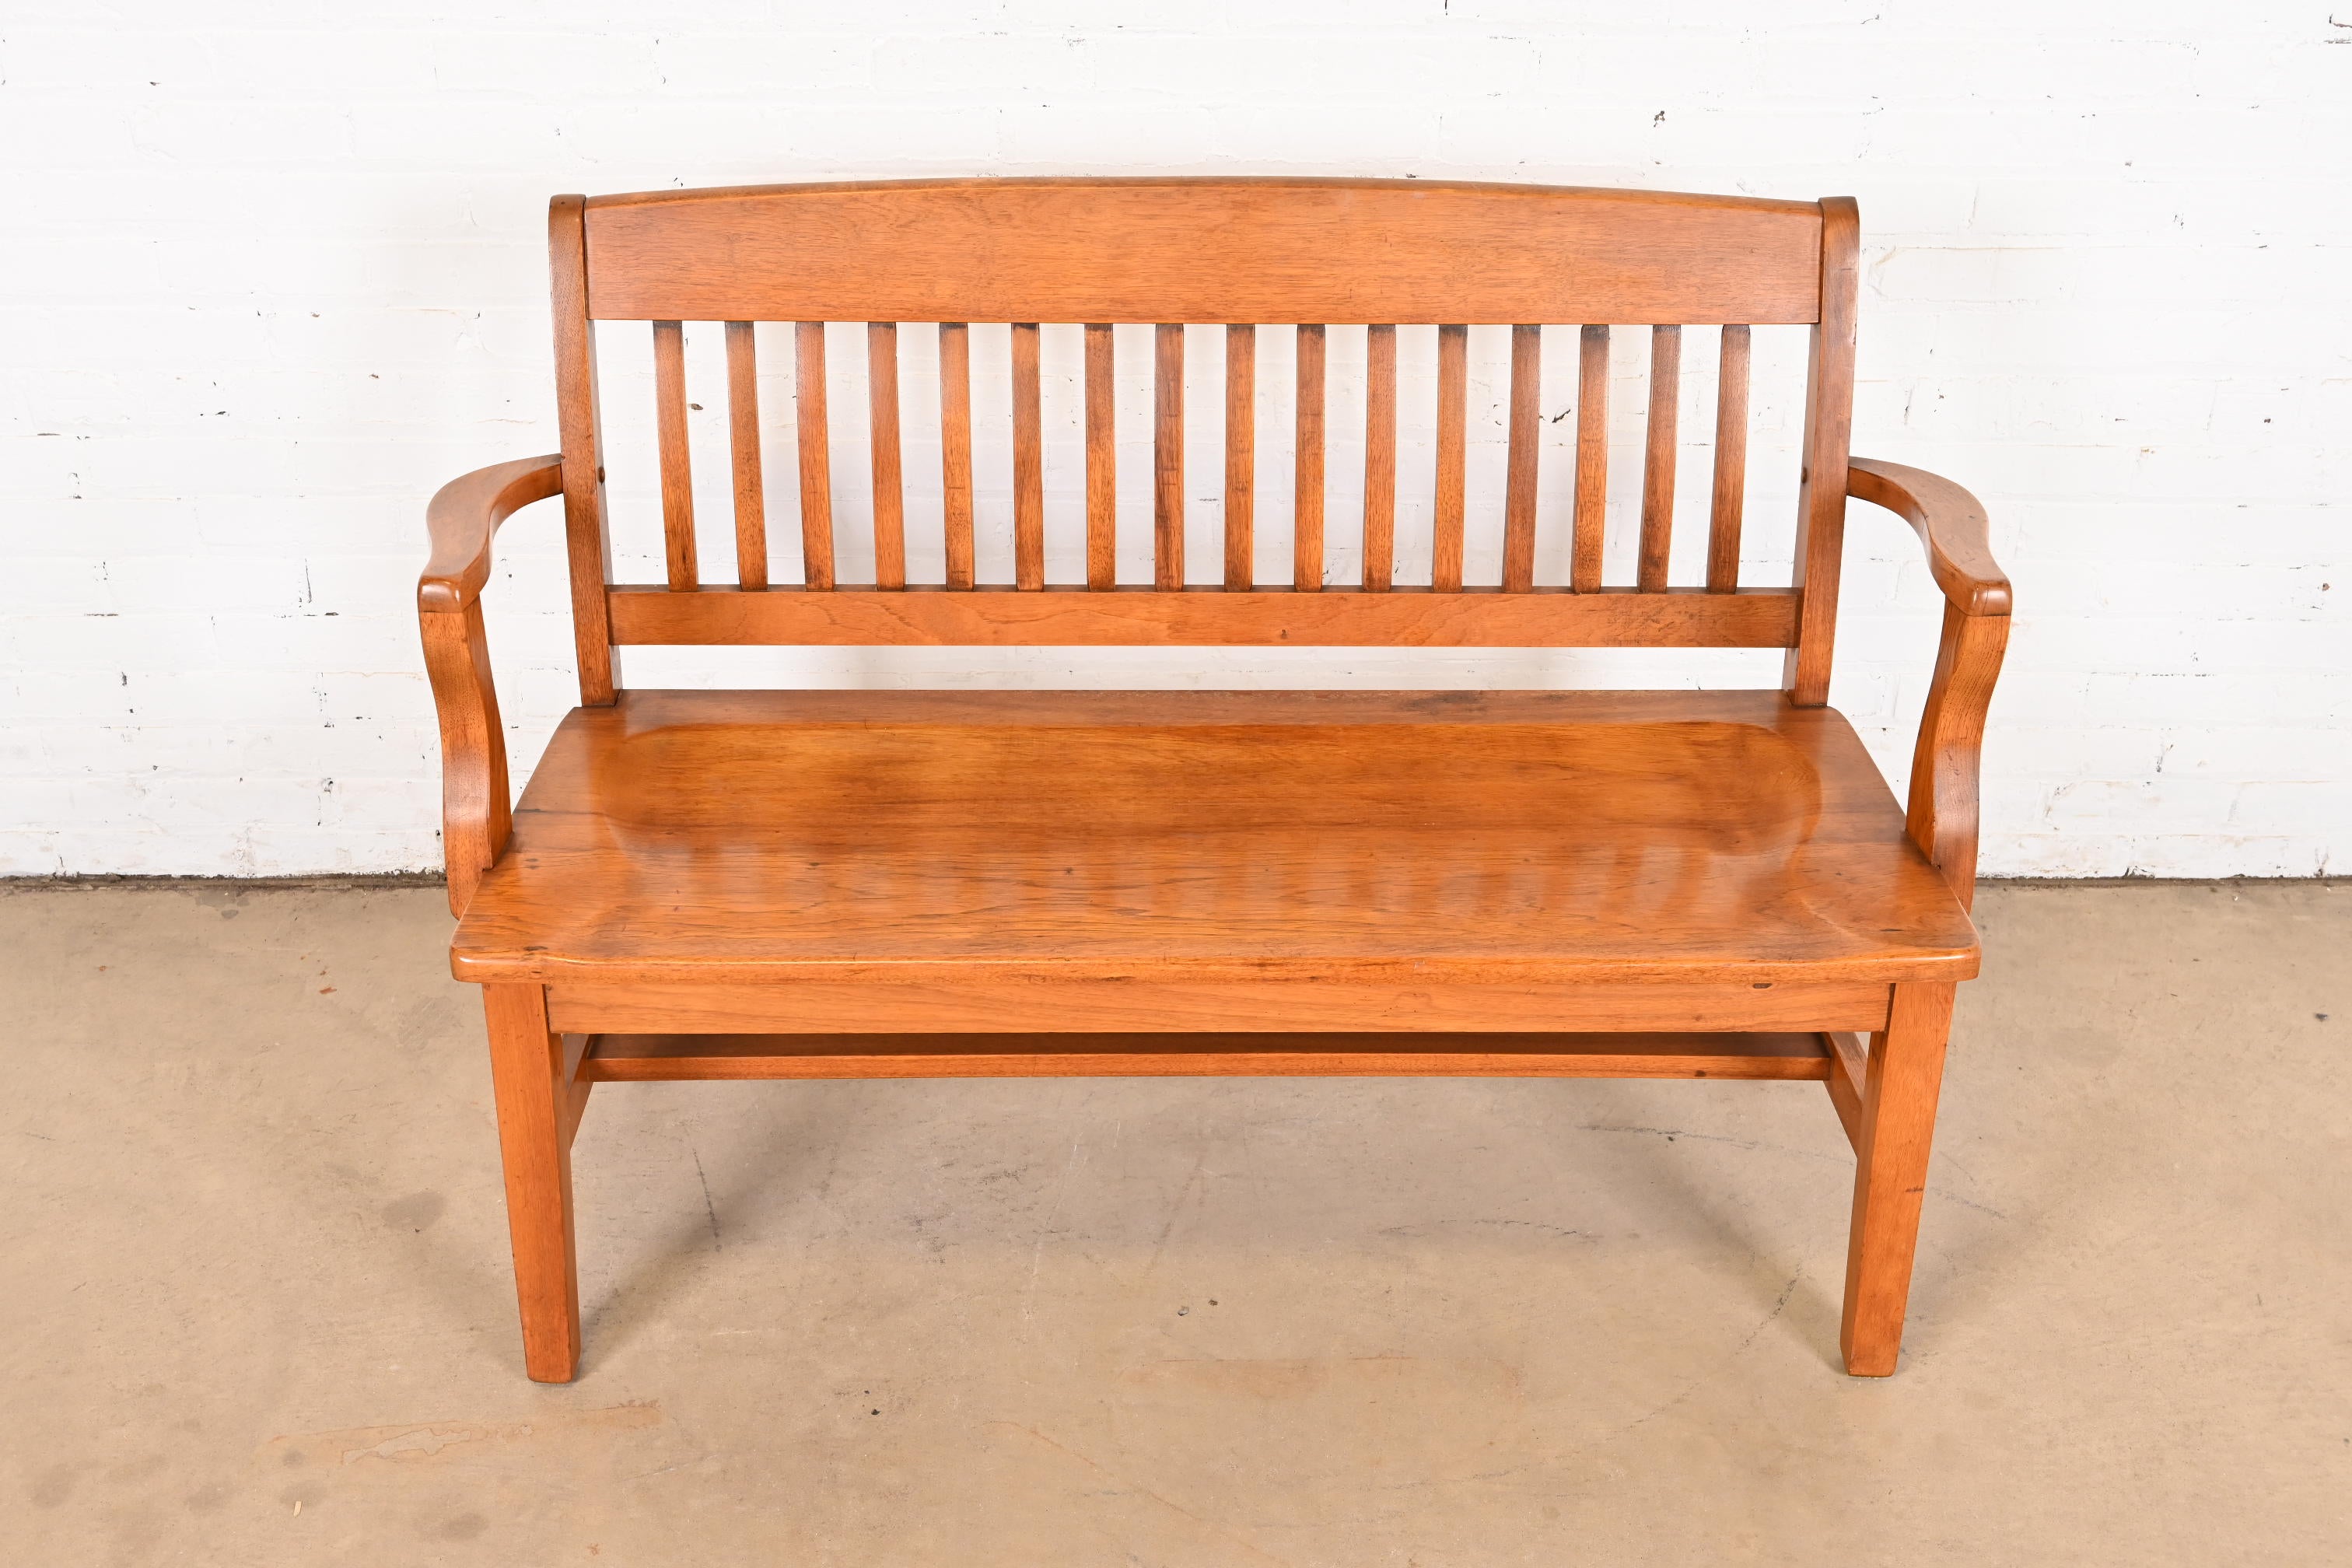 An exceptional Arts & Crafts solid oak banker or lawyer bench

USA, Circa 1940s

Measures: 52.75